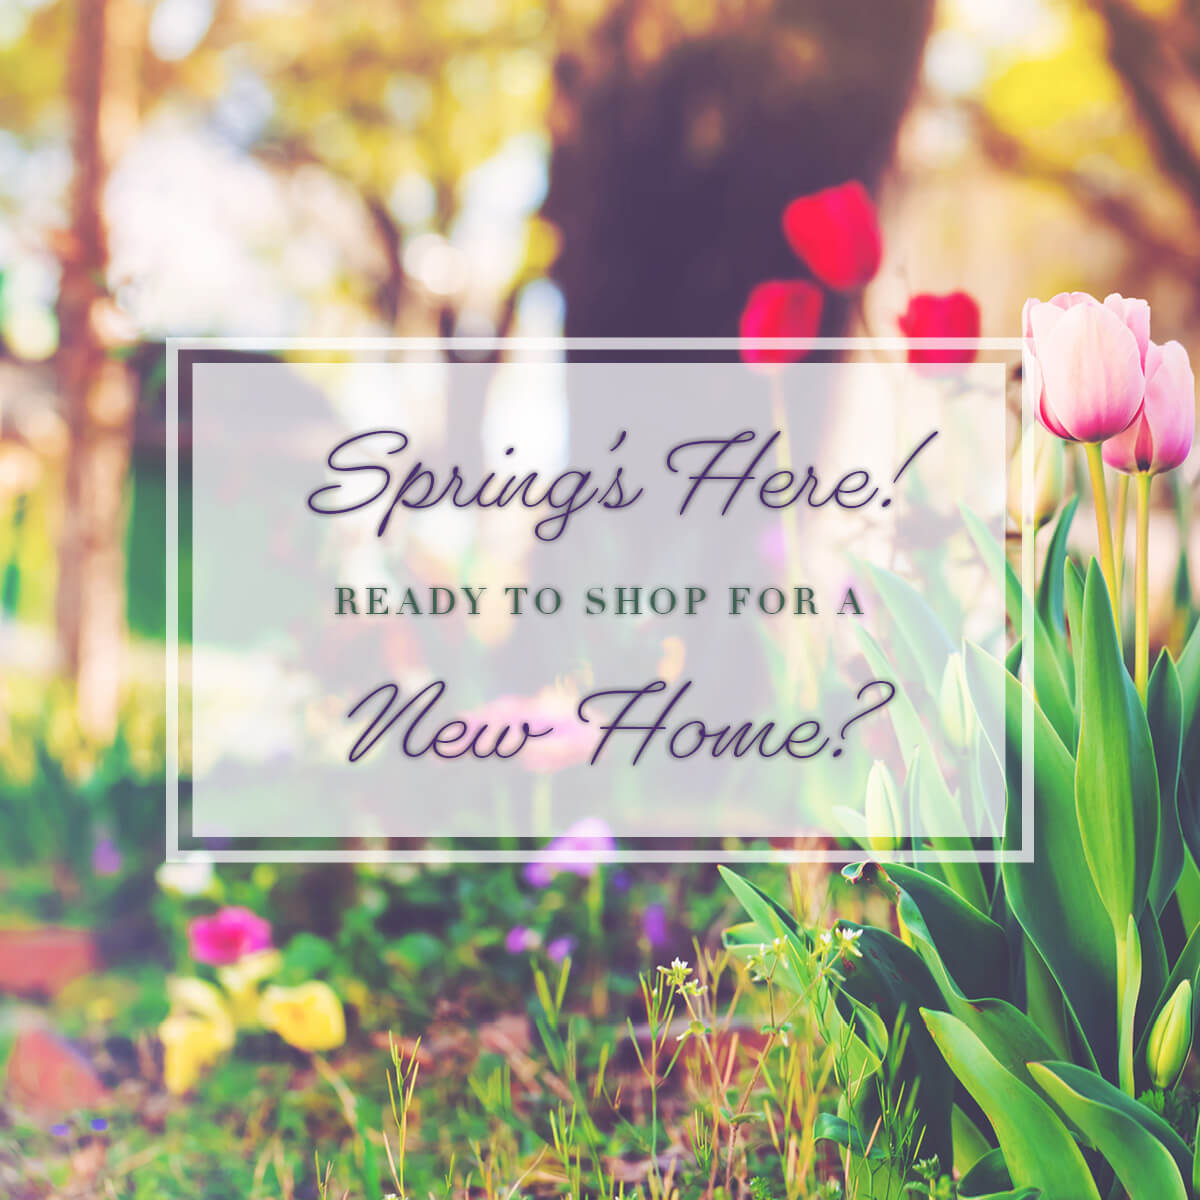 Ready to shop for a new home?